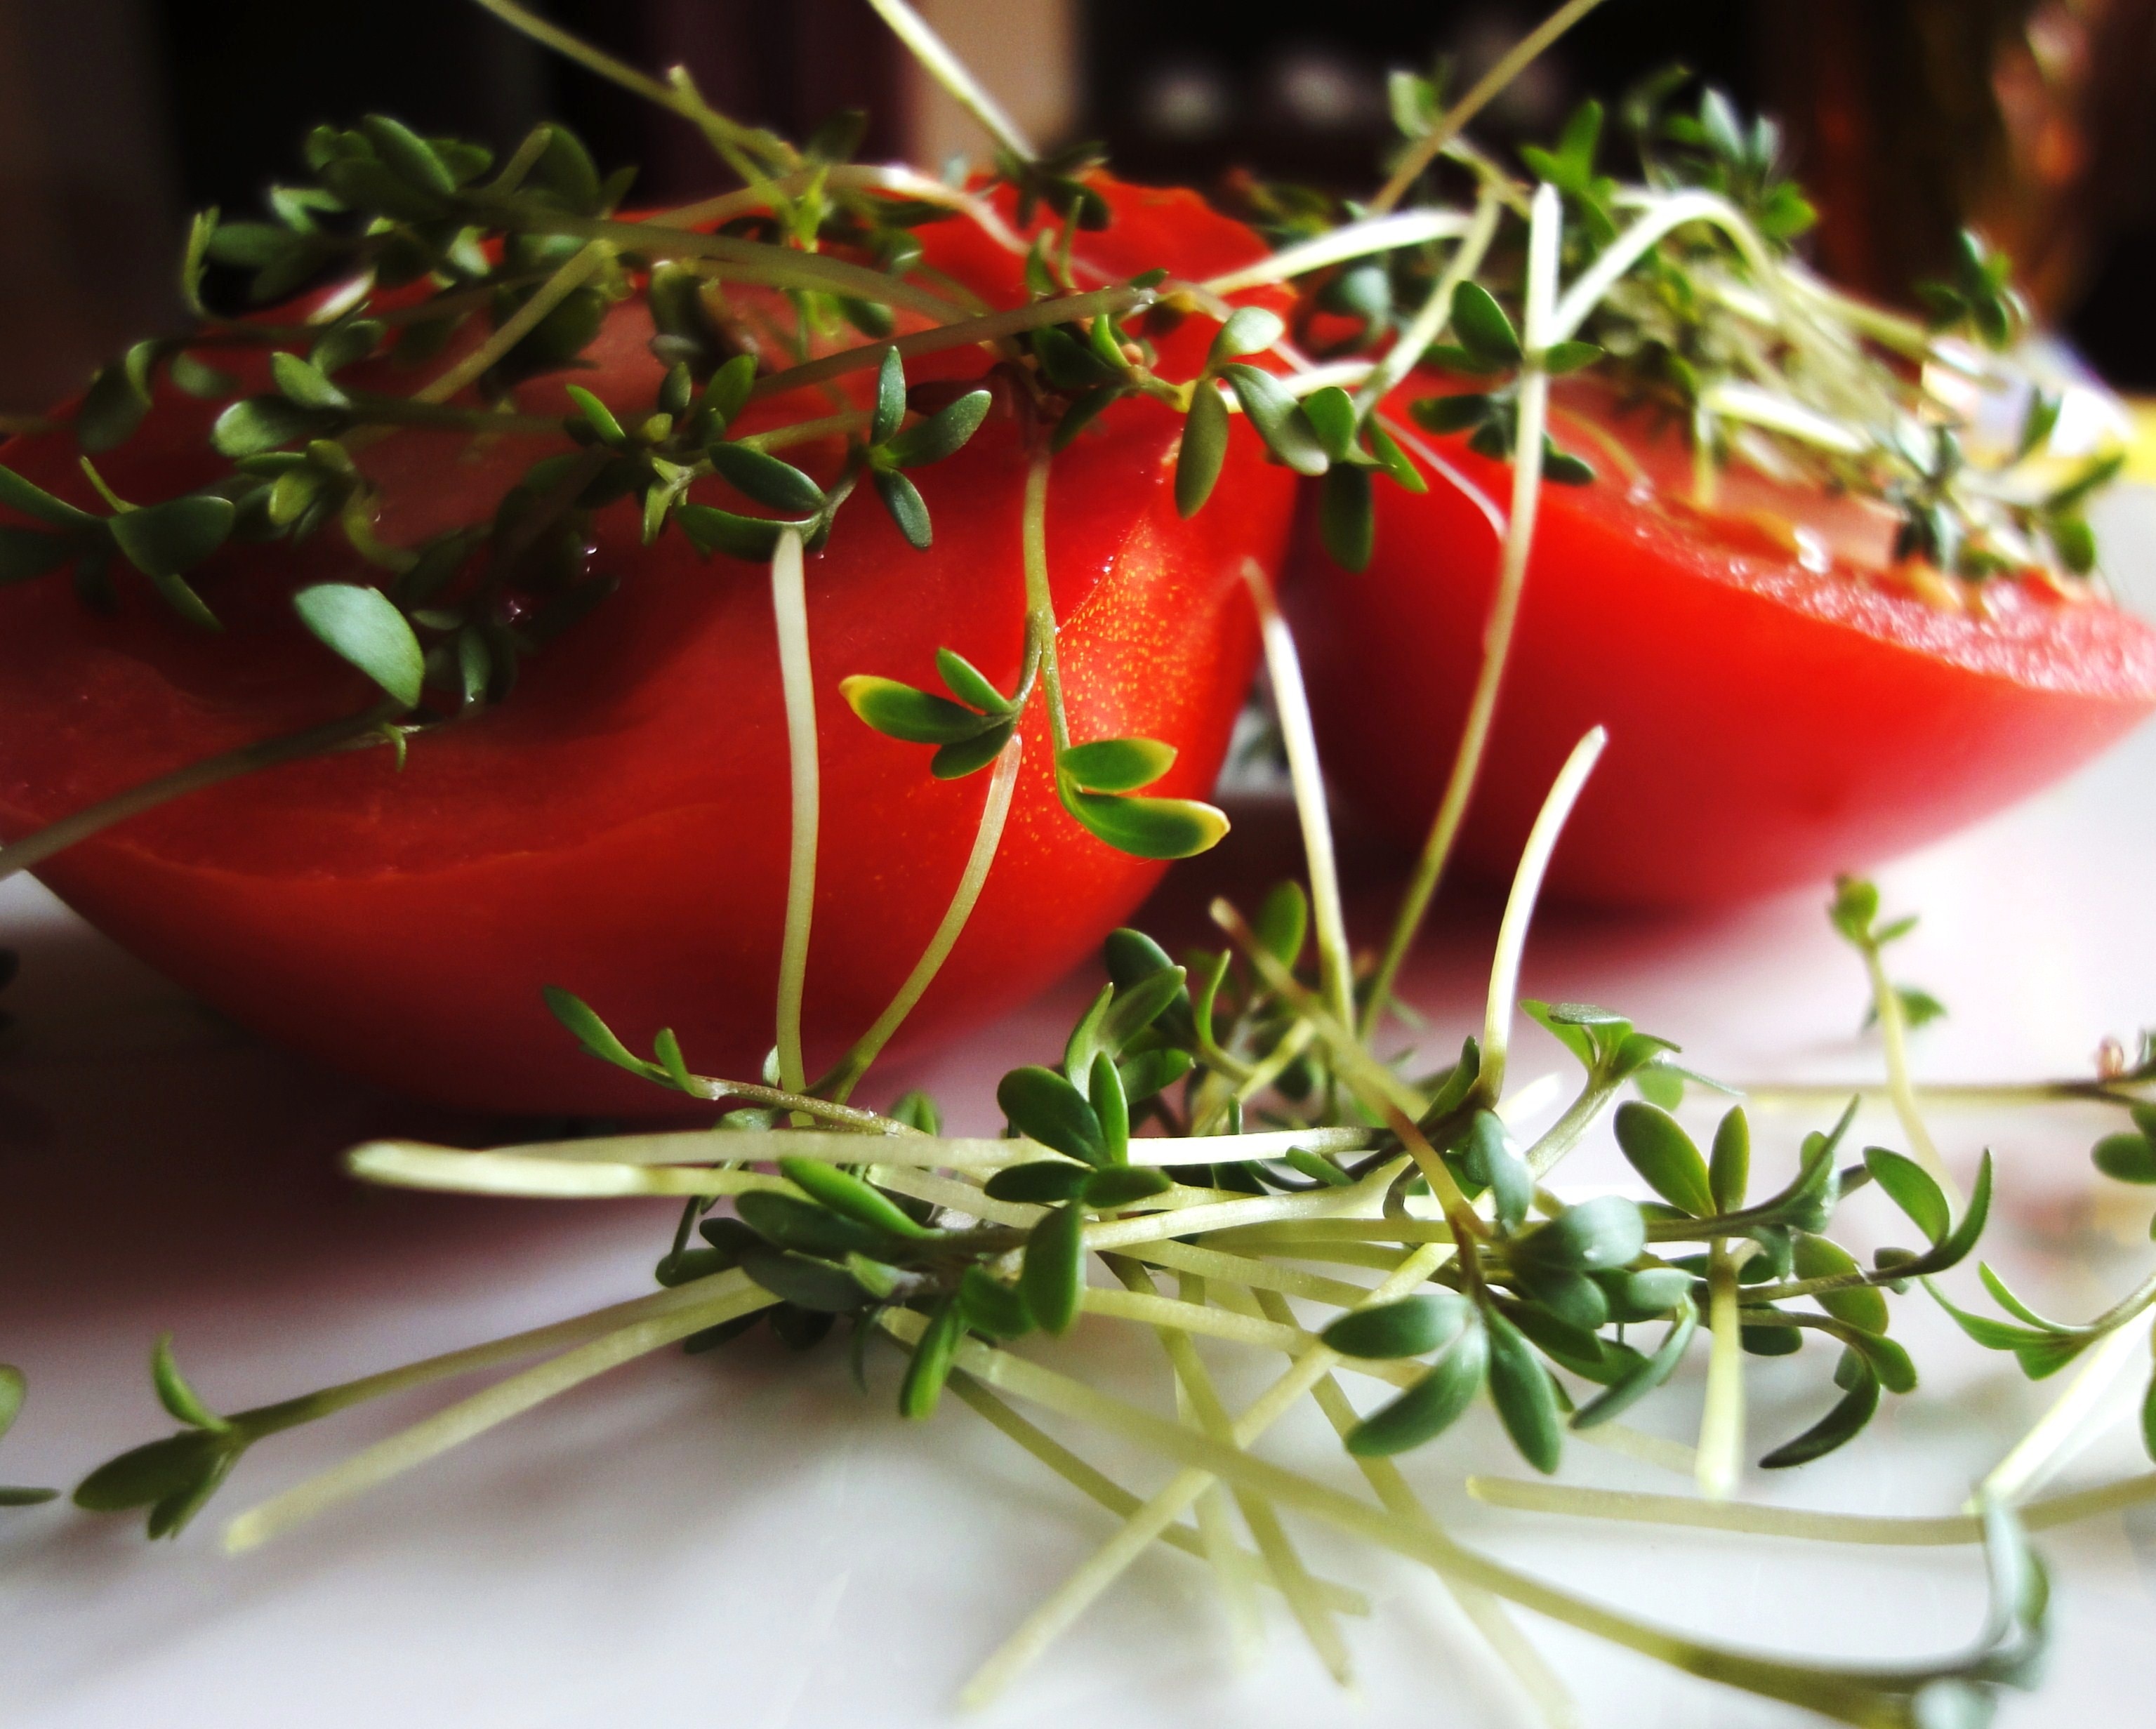 sliced red tomatoes with green vegetables